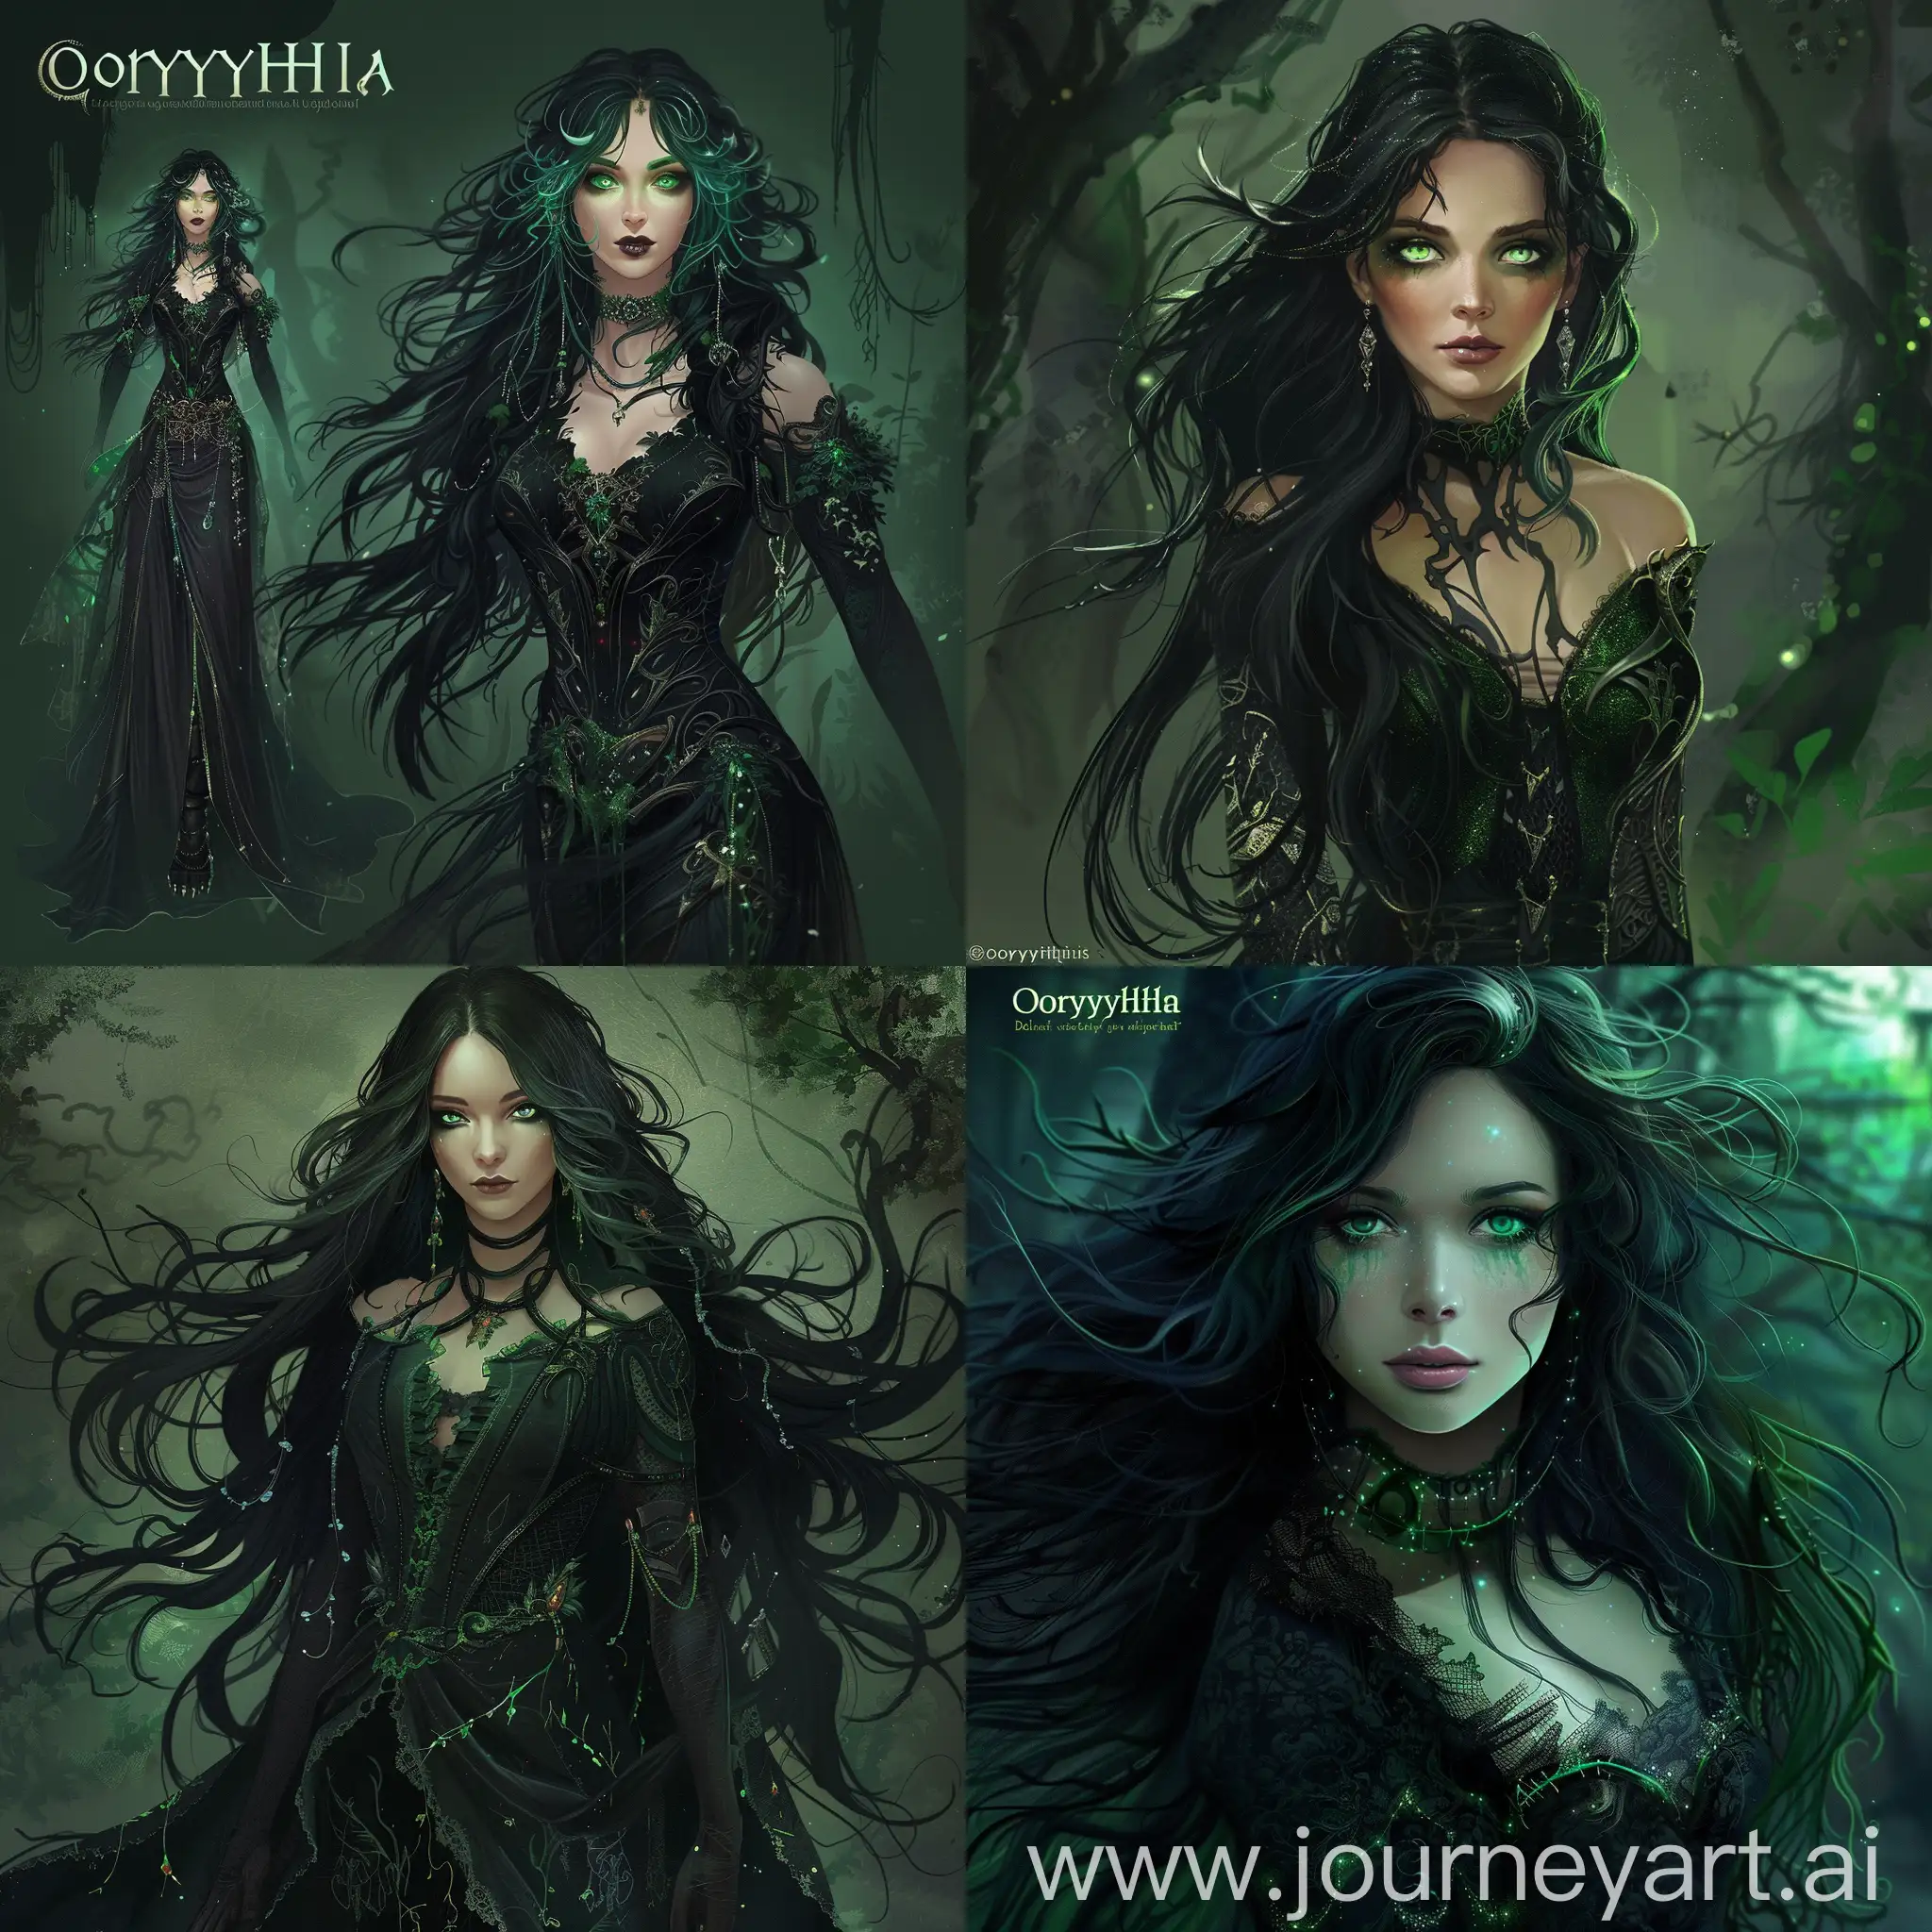 Ethereal-Beauty-Lorythia-Guardian-of-the-Dark-Woodland-Realm